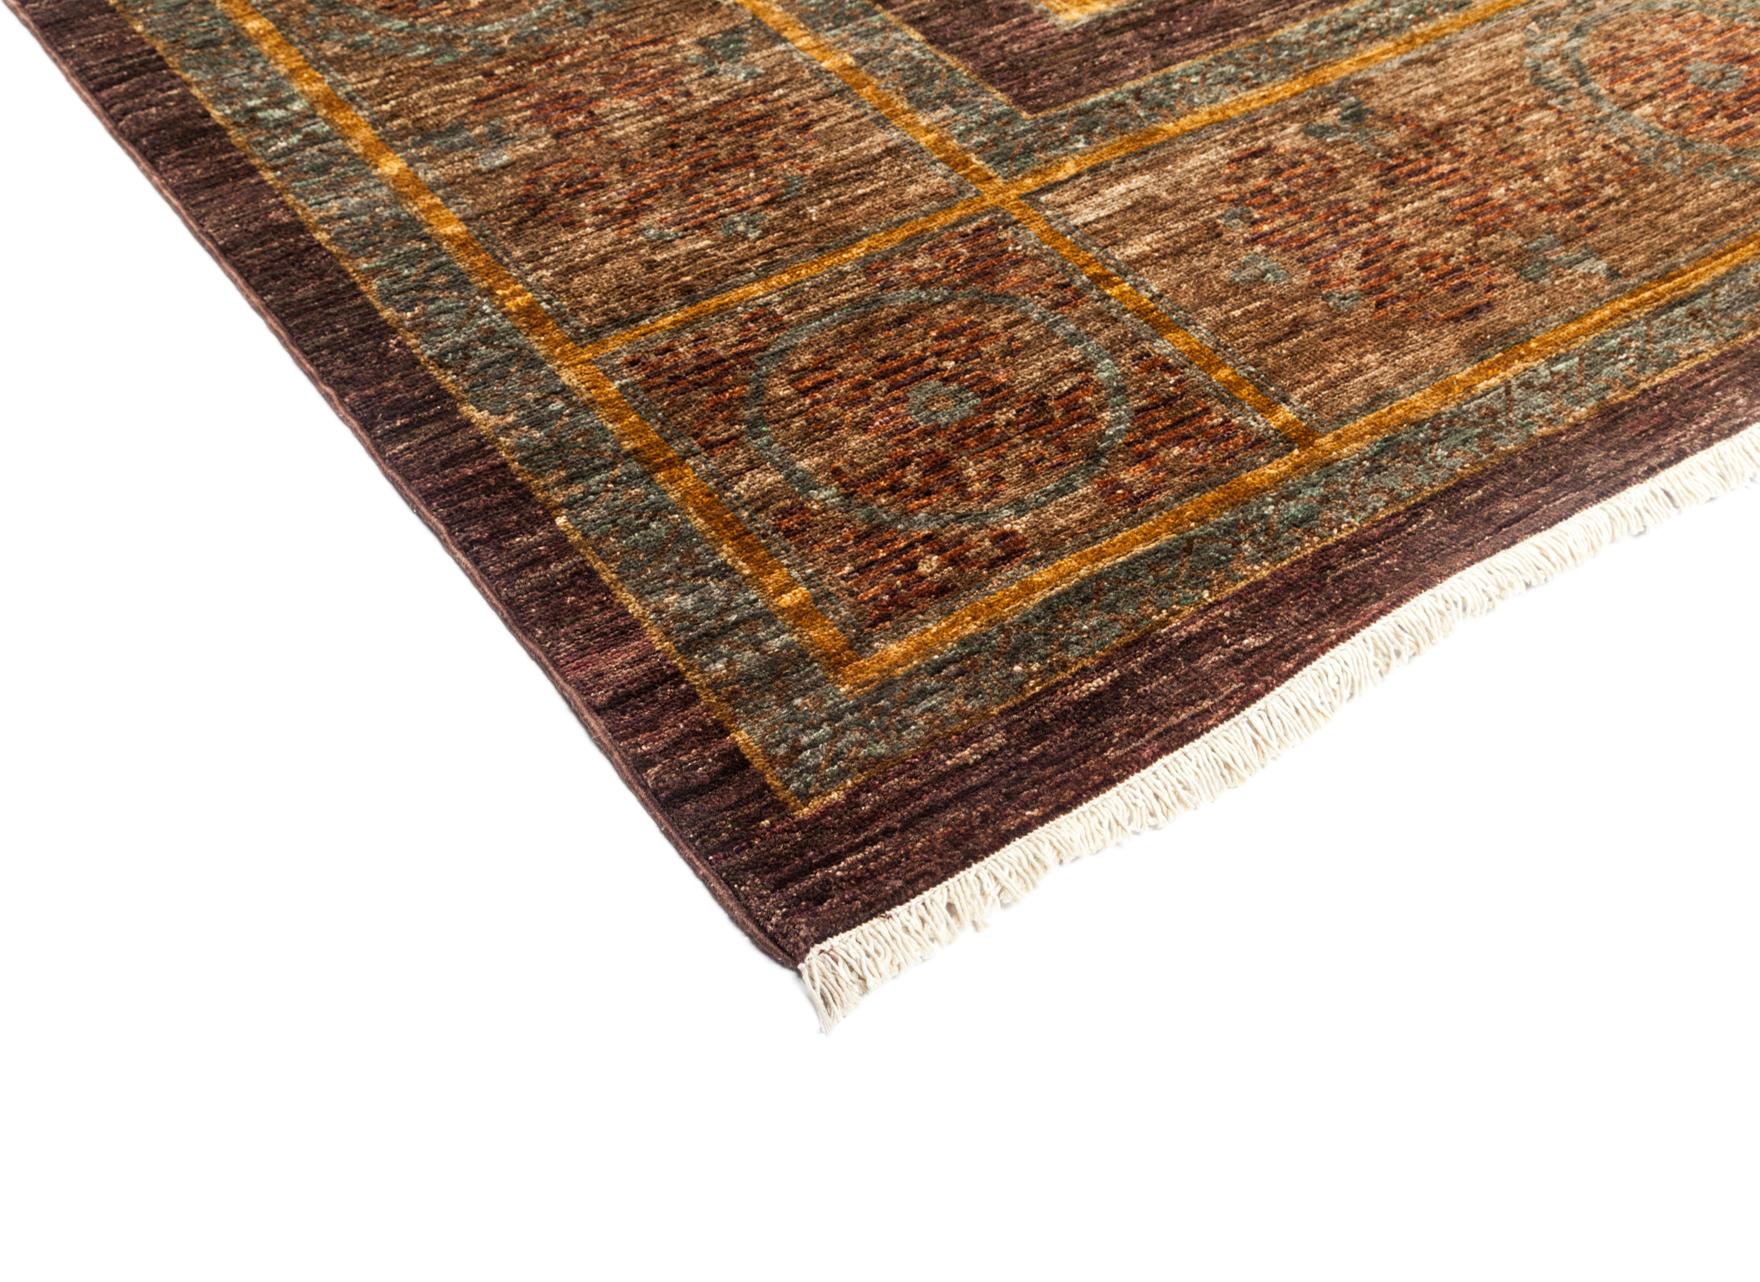 Color: Brown, made in Pakistan. 100% wool. Whether boasting a field of flowers or ancient tribal symbols, patterned rugs are the easiest way to enrich a space. Subtle colors and intricate motifs reinforce the quiet sophistication of a traditional